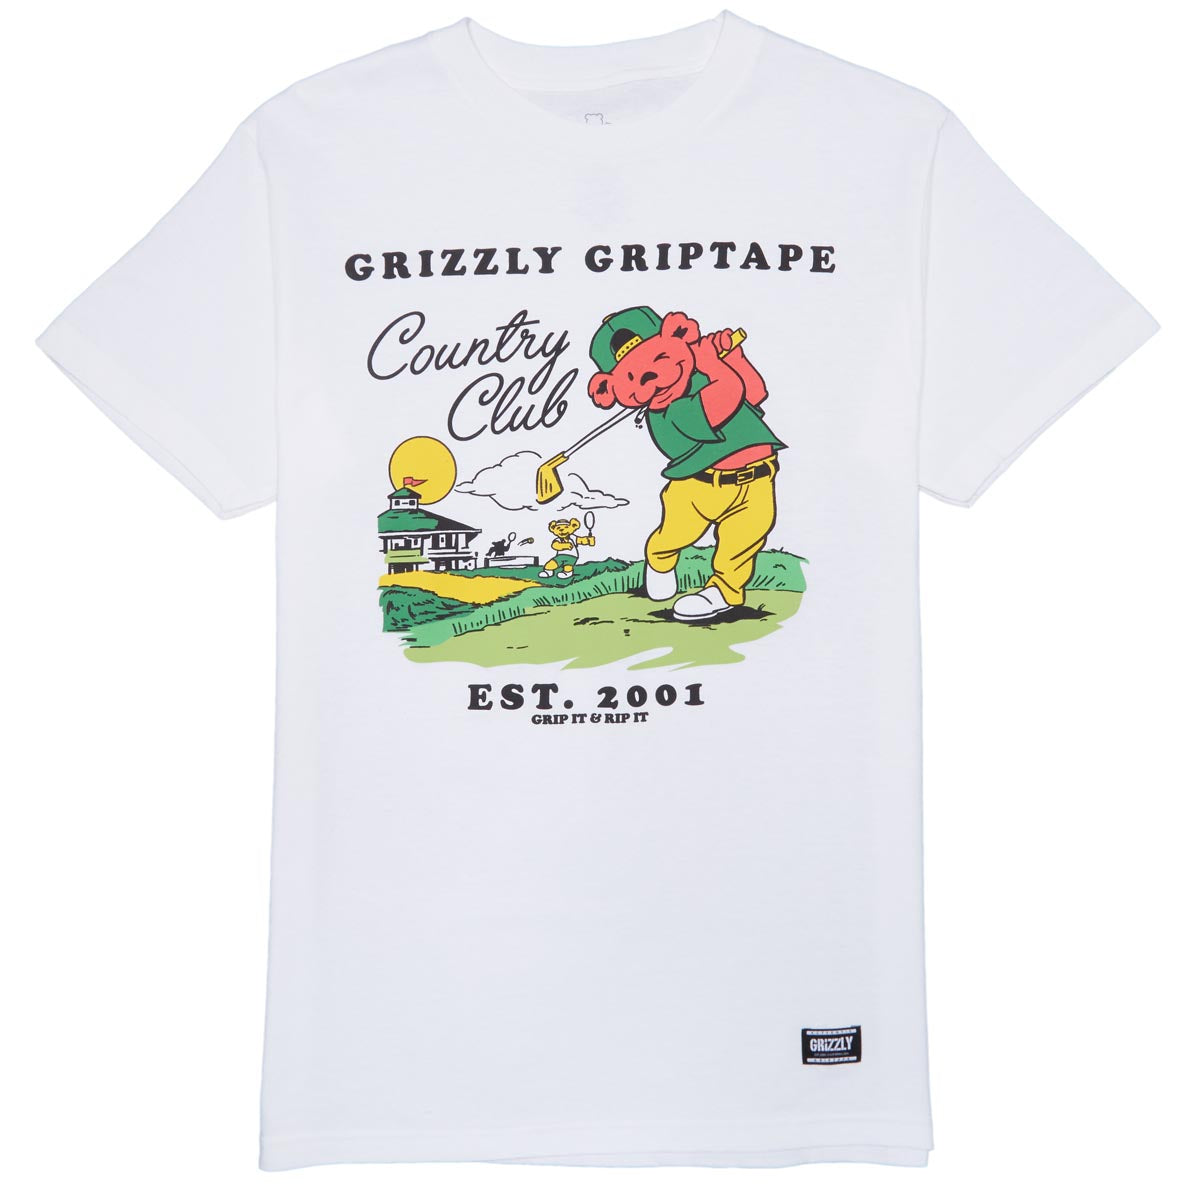 Grizzly Back Nine T-Shirt - White image 1